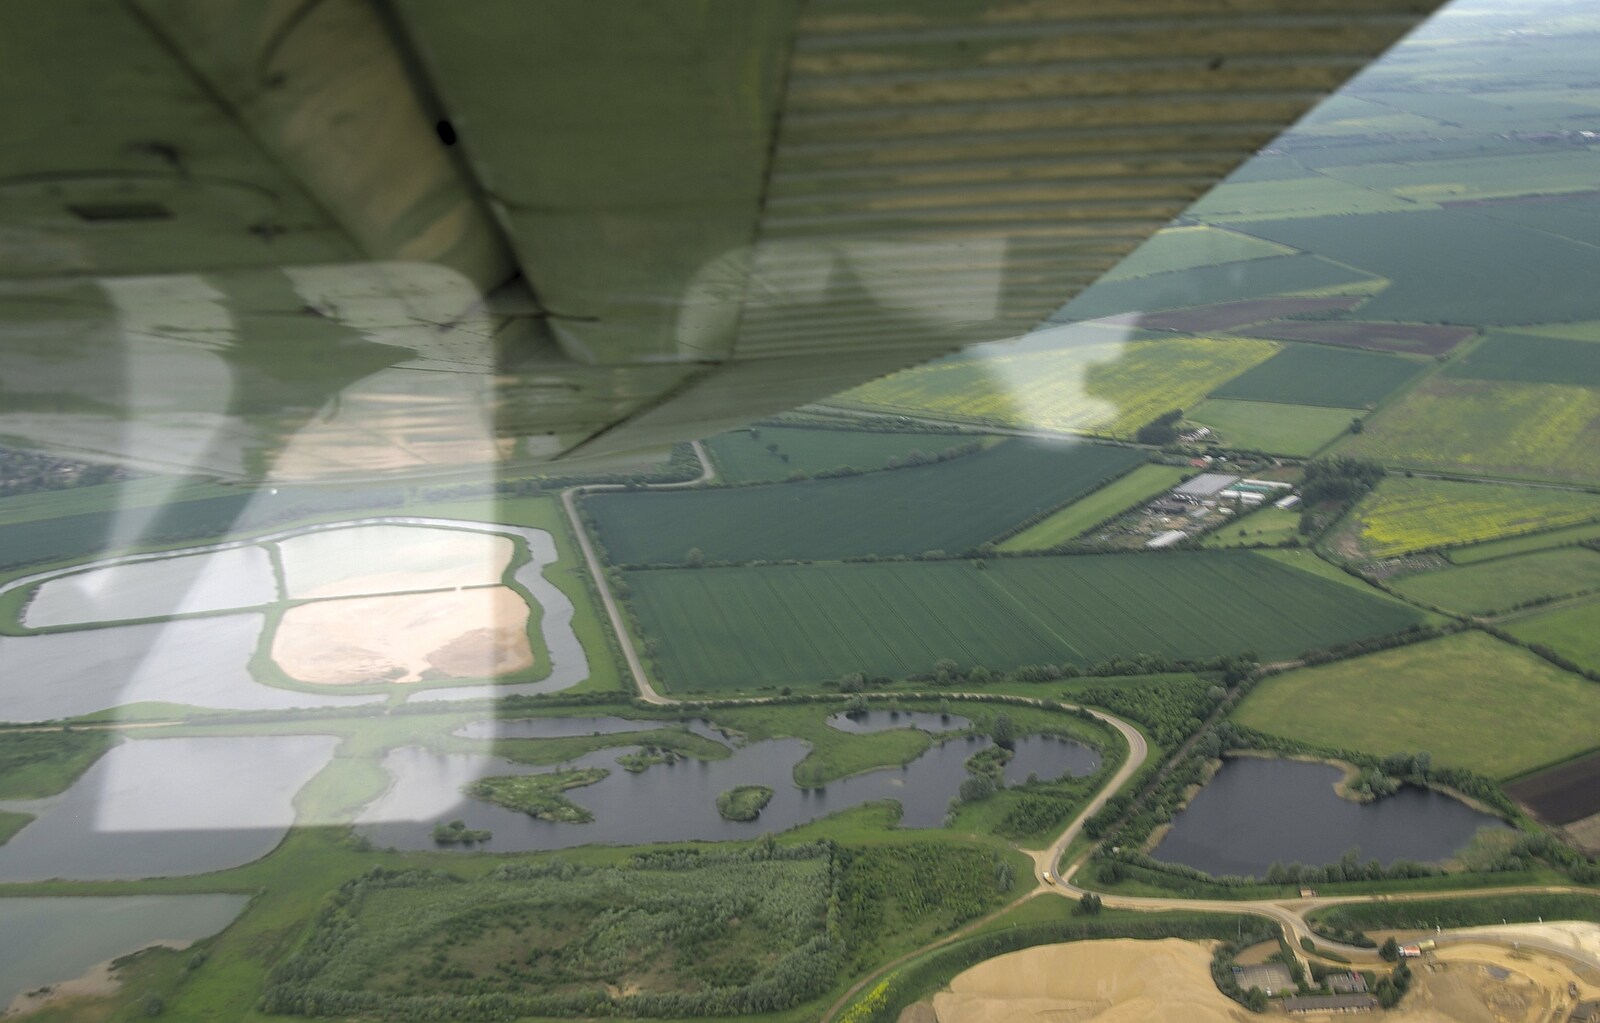 Nosher Flies a Plane, Cambridge Airport, Cambridge - 28th May 2008: Some flooded fields